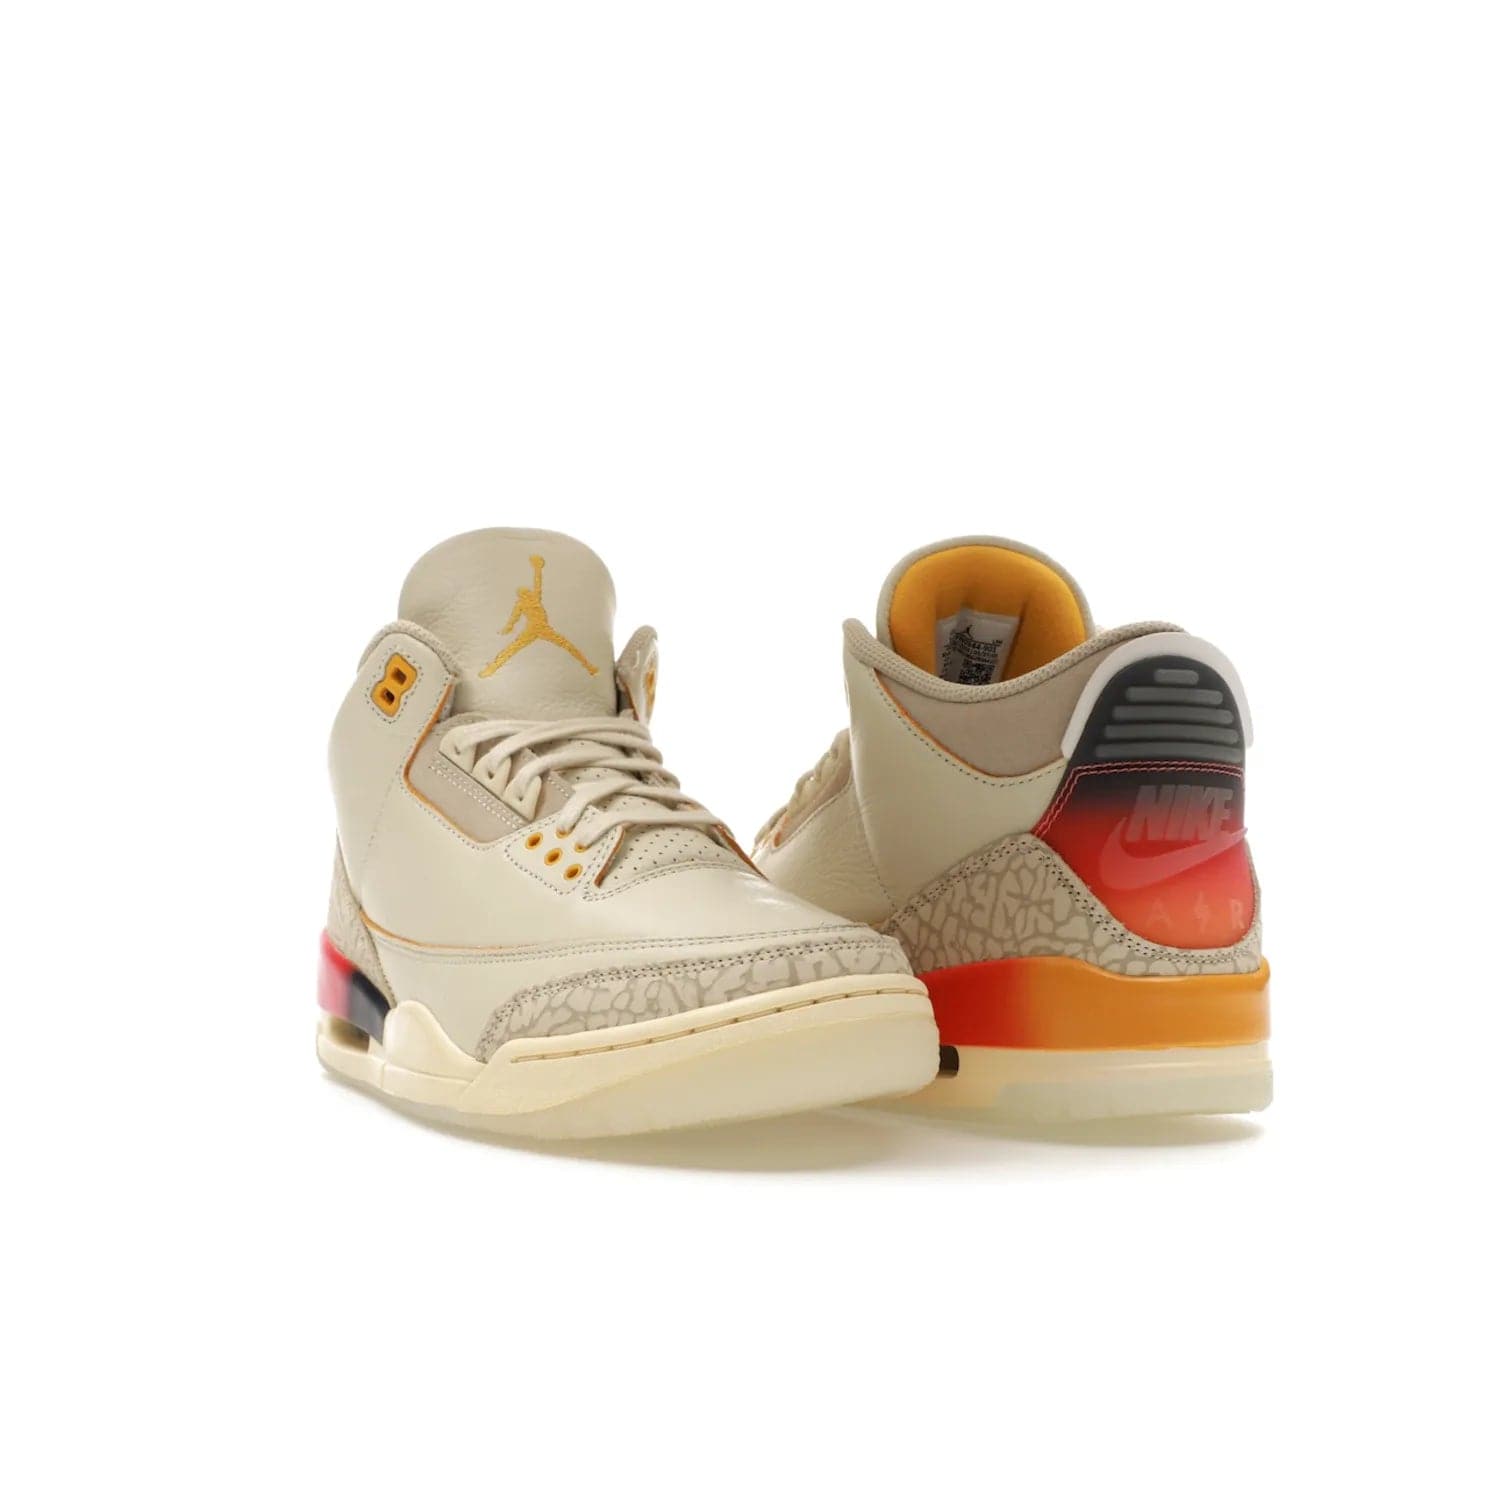 Jordan 3 Retro SP J Balvin Medellín Sunset - Image 7 - Only at www.BallersClubKickz.com - J Balvin x Jordan 3 Retro SP: Celebrate the joy of life with a colorful, homage to the electrifying reggaeton culture and iconic Jordan 3. Limited edition, Sept. 23. $250.